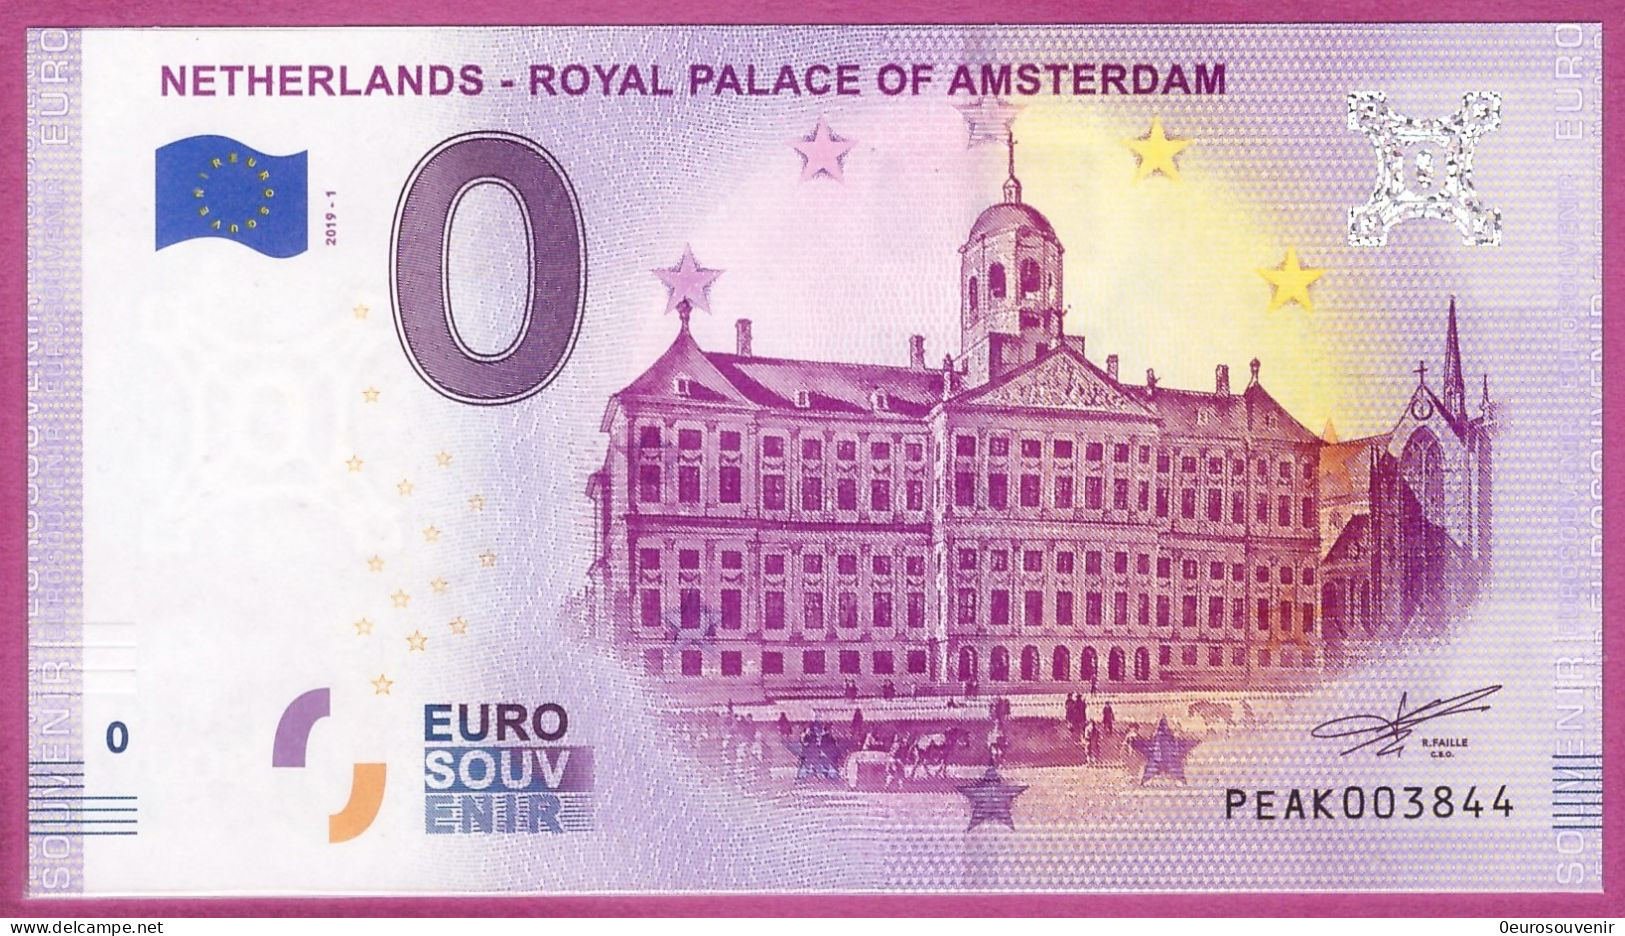 0-Euro PEAK 2019-1  NETHERLANDS - ROYAL PALACE OF AMSTERDAM - Private Proofs / Unofficial